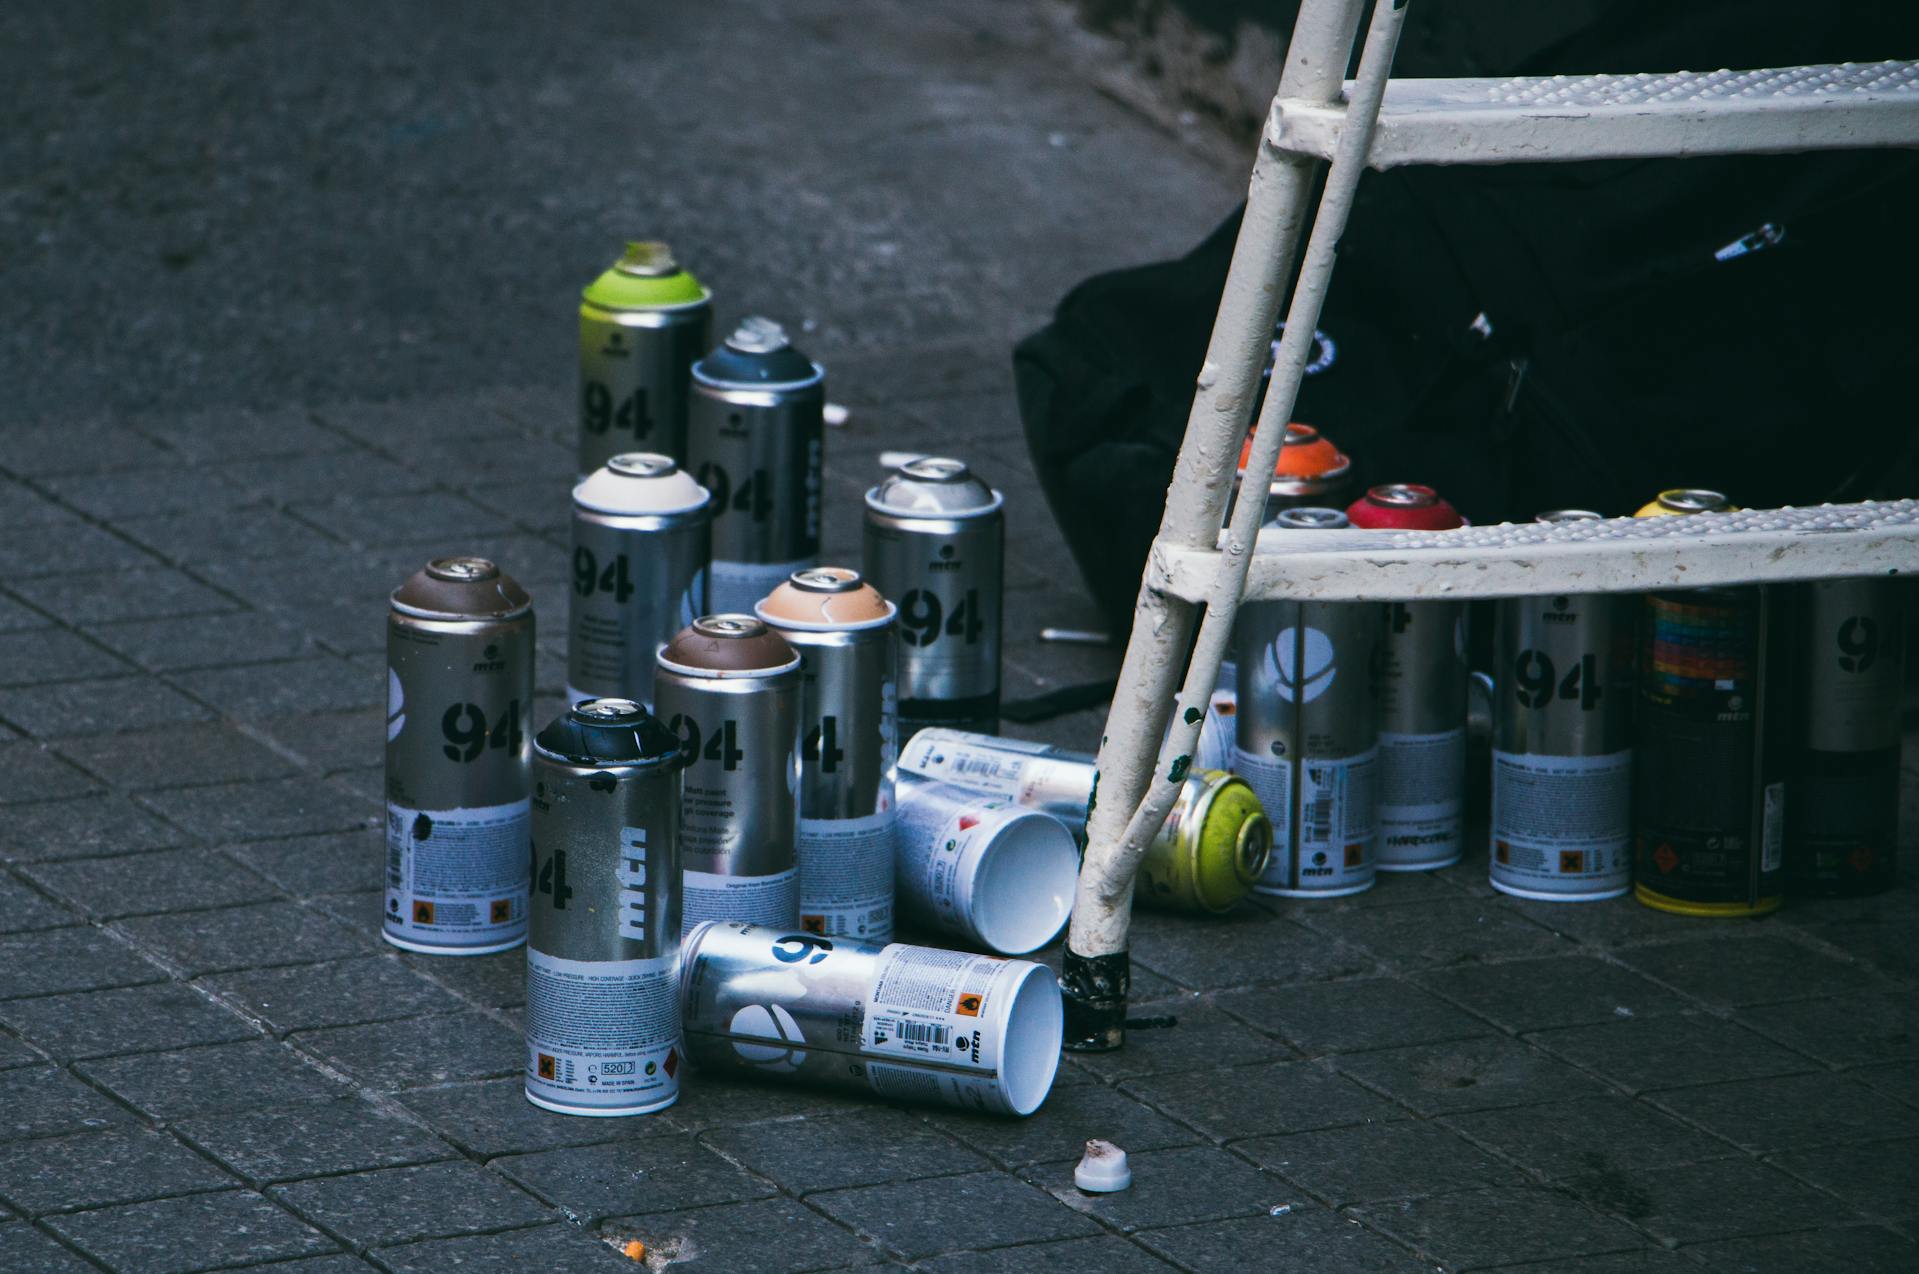 Cans of spray paint | Source: Pexels